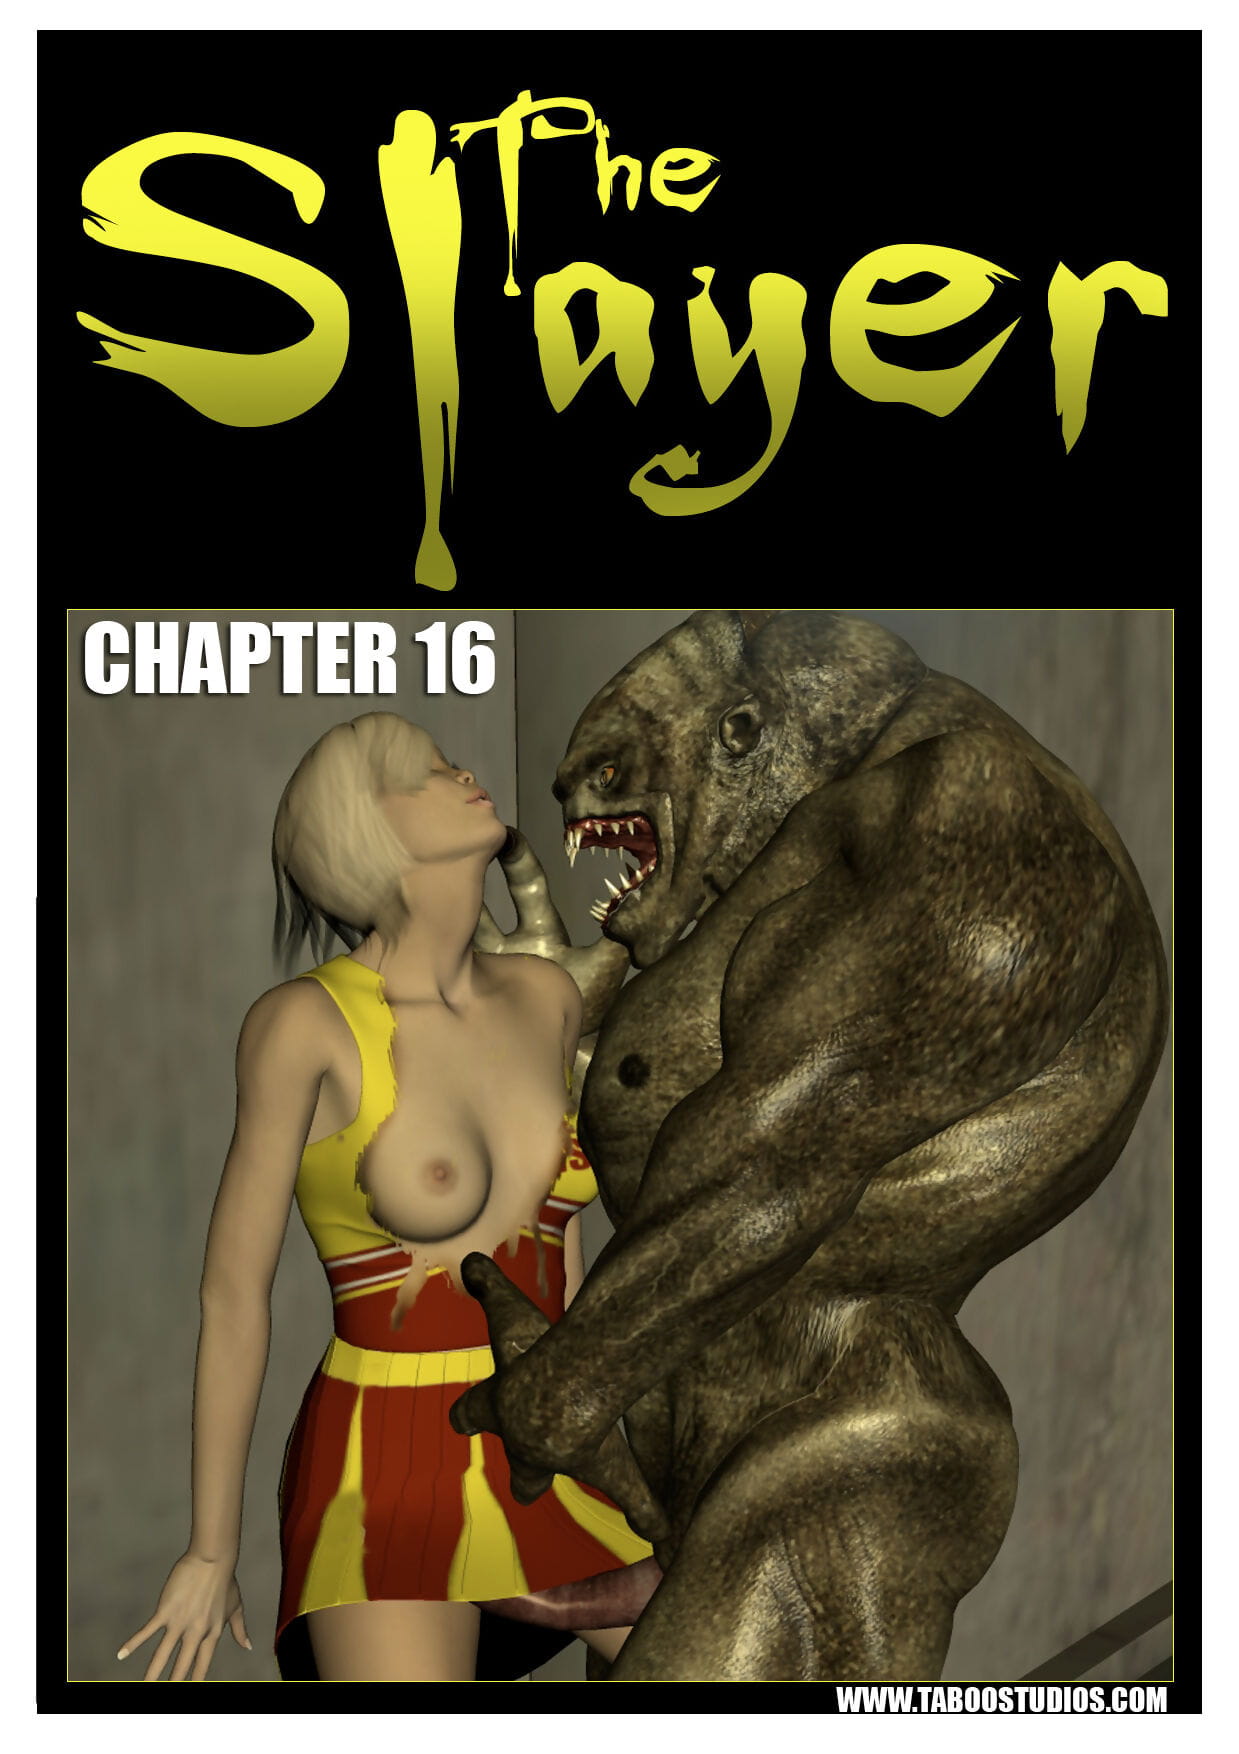 Slayer Issue 16 page 1